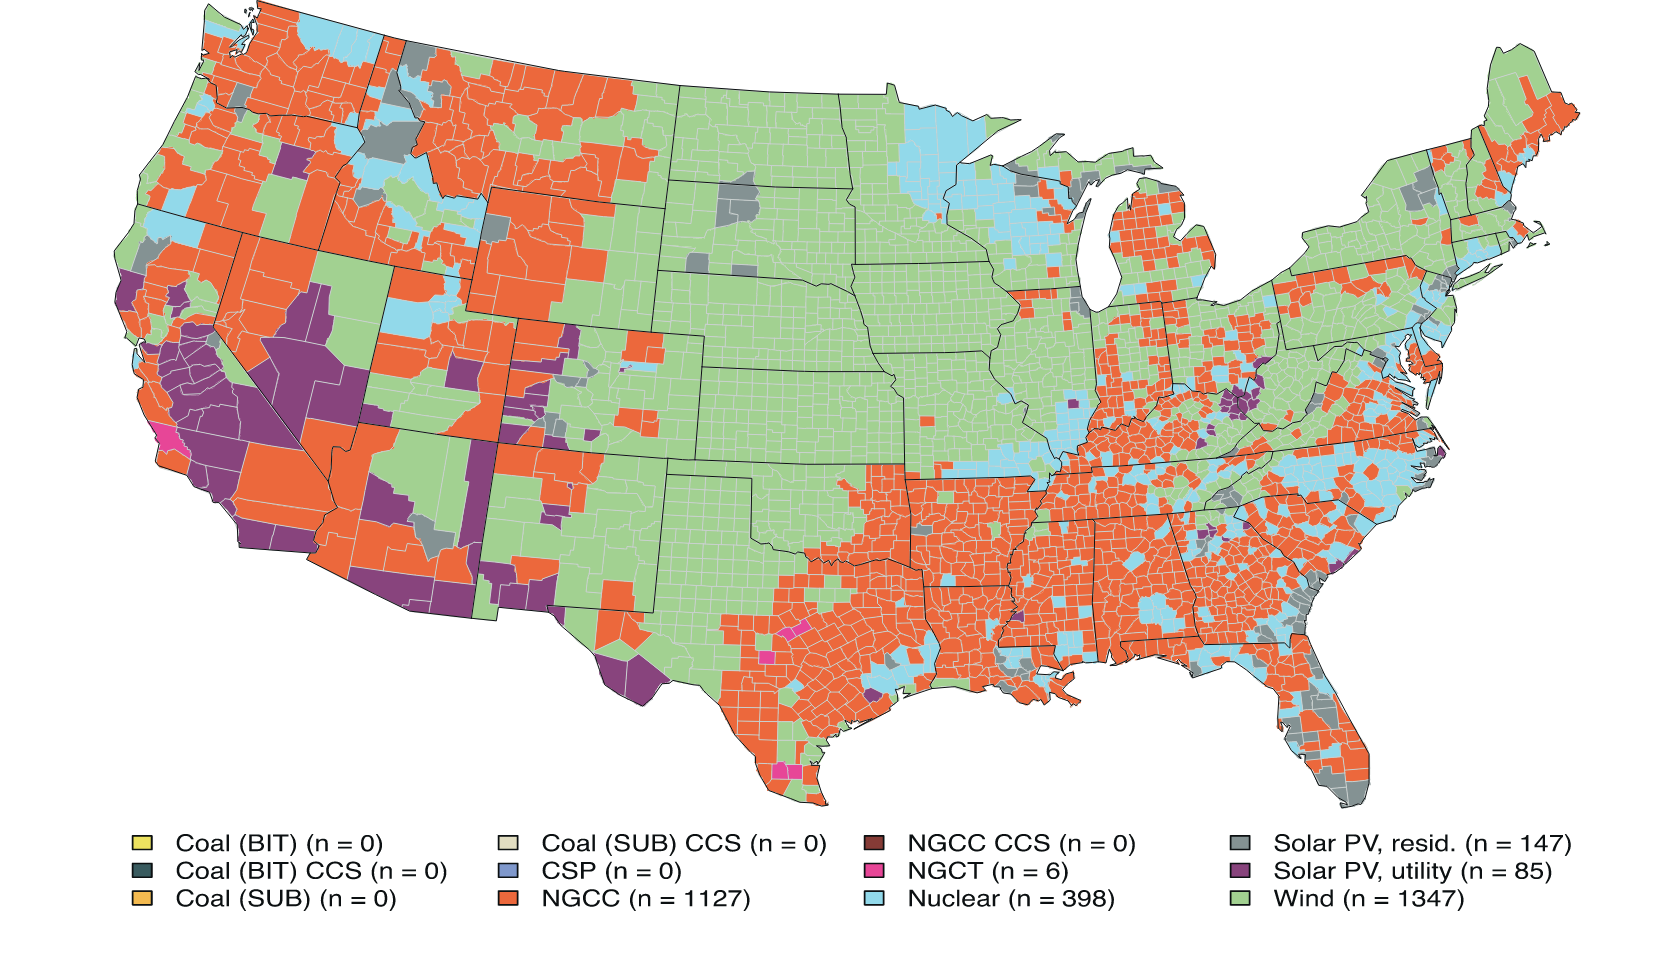 2. Minimum LCOEs around the USA. "Minimum cost technology for each county, including externalities (air emissions and CO2 ), restrictions via assumed availability zones, and
reference case assumptions for capital and fuel costs. Numbers in legend refer to the number of counties in which that technology is the
lowest cost."[1a]